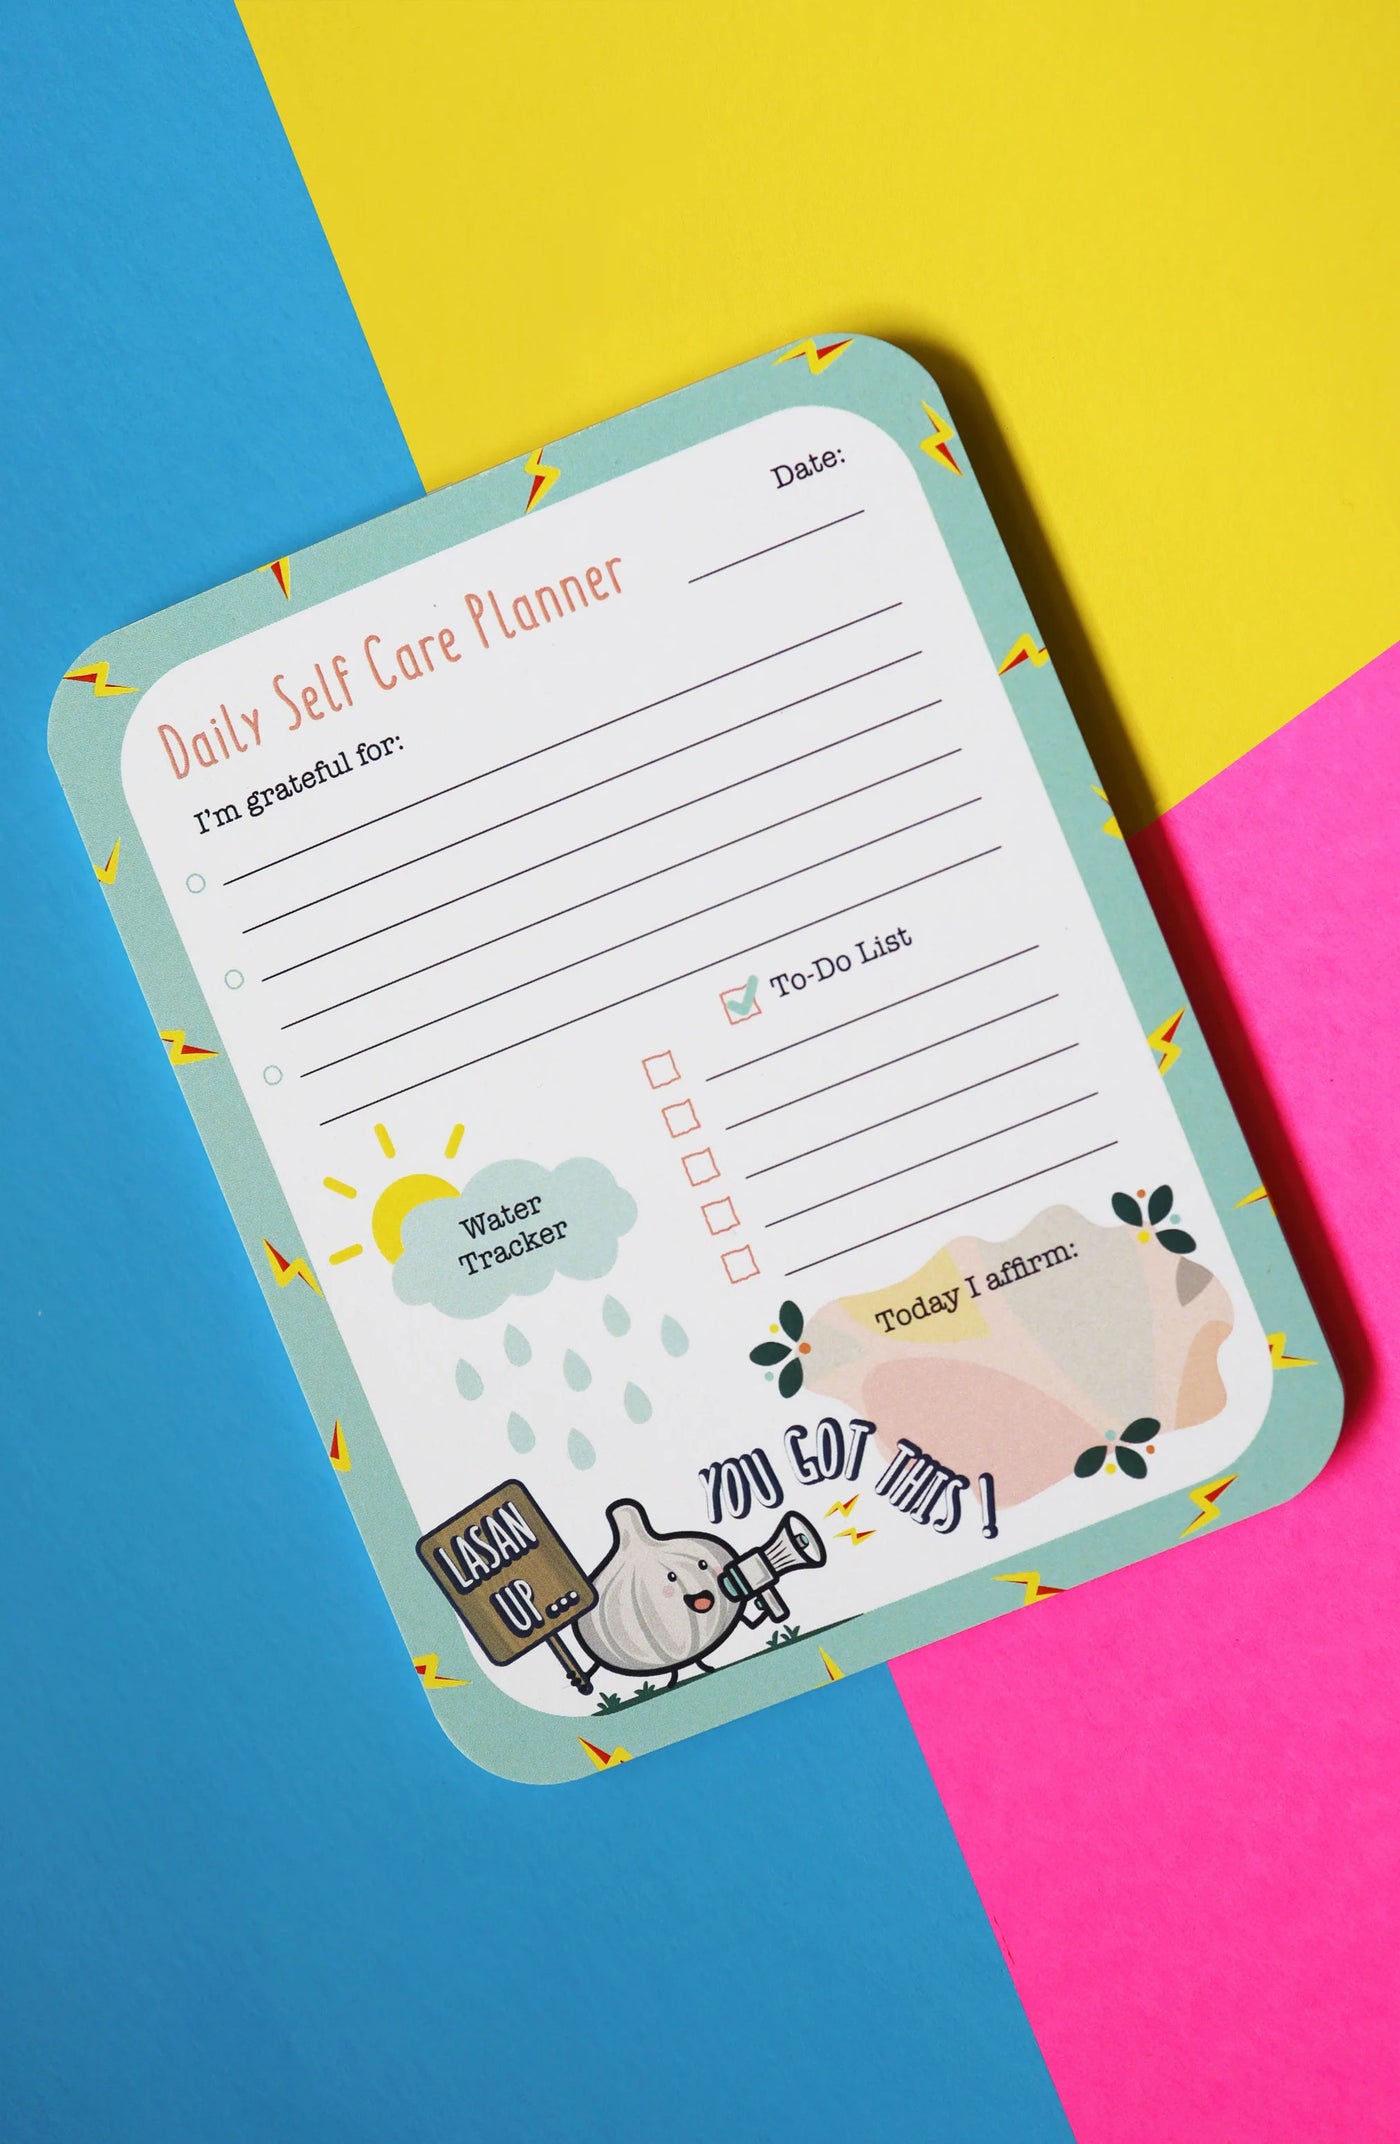 Daily Self Care Planner - Lasan Up!